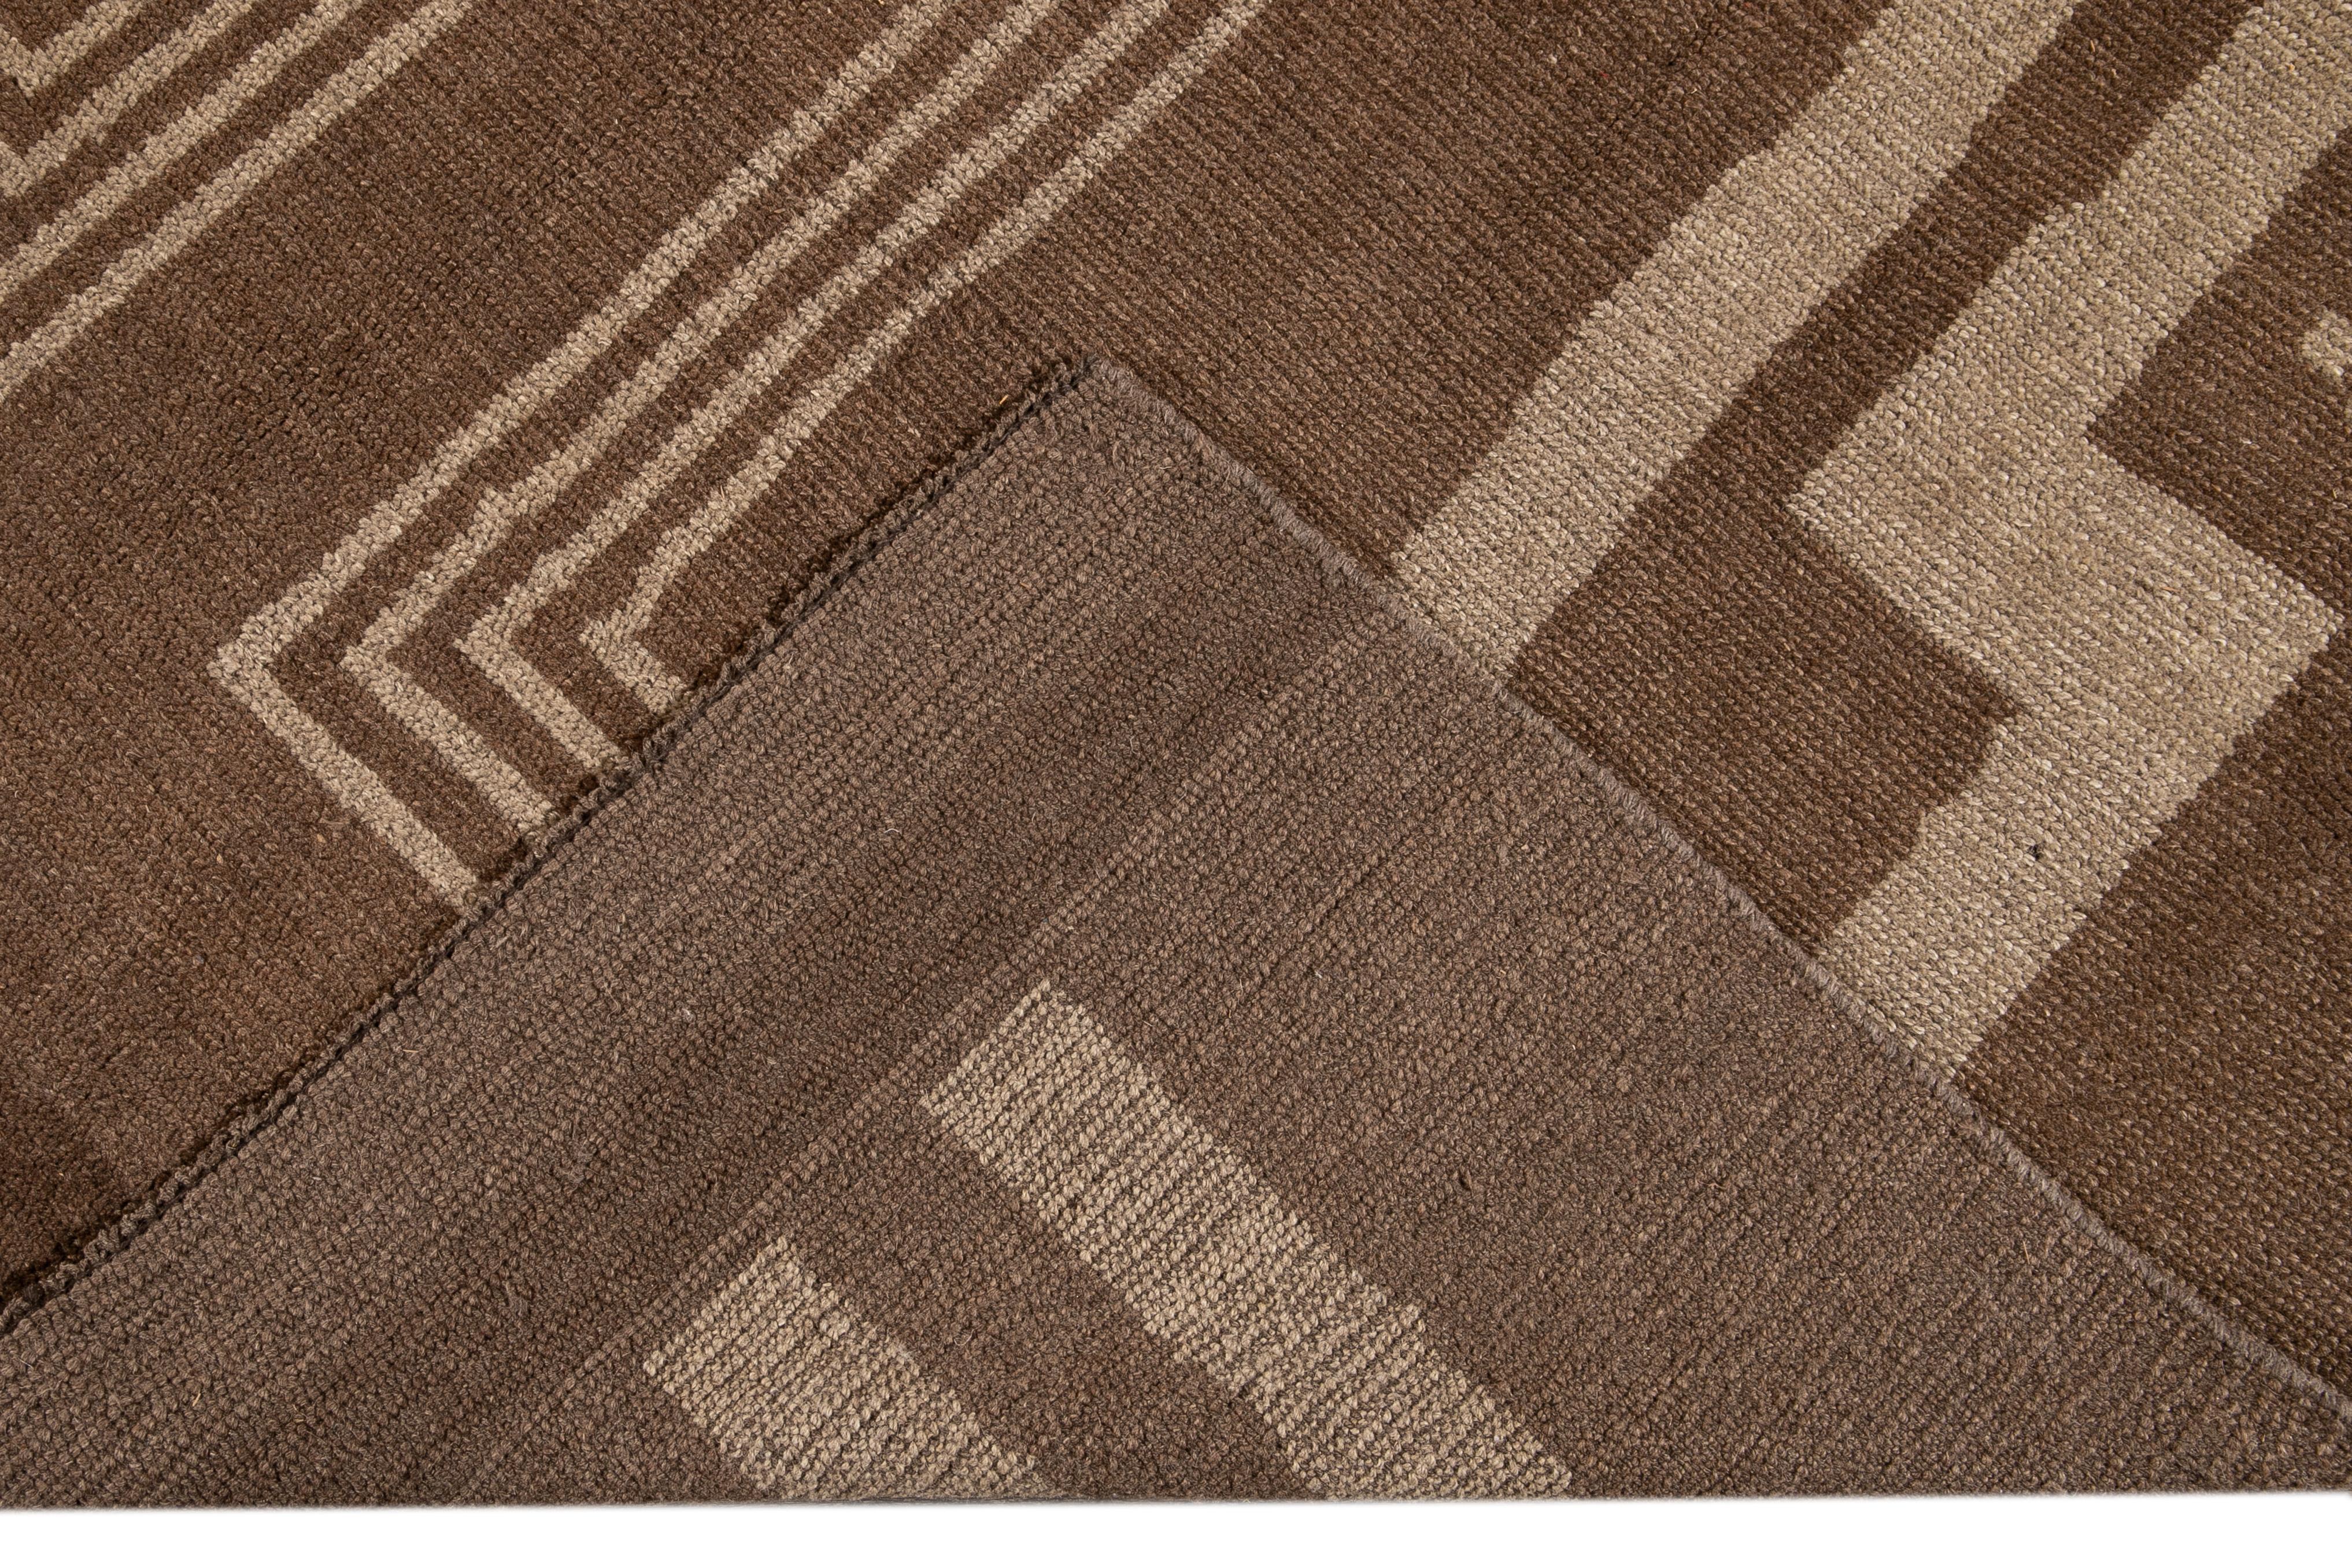 Beautiful Modern Deco-style hand-knotted wool rug with a brown field. This Contemporary rug has accents of beige in a gorgeous all-over geometric design.

This rug measures: 7'1